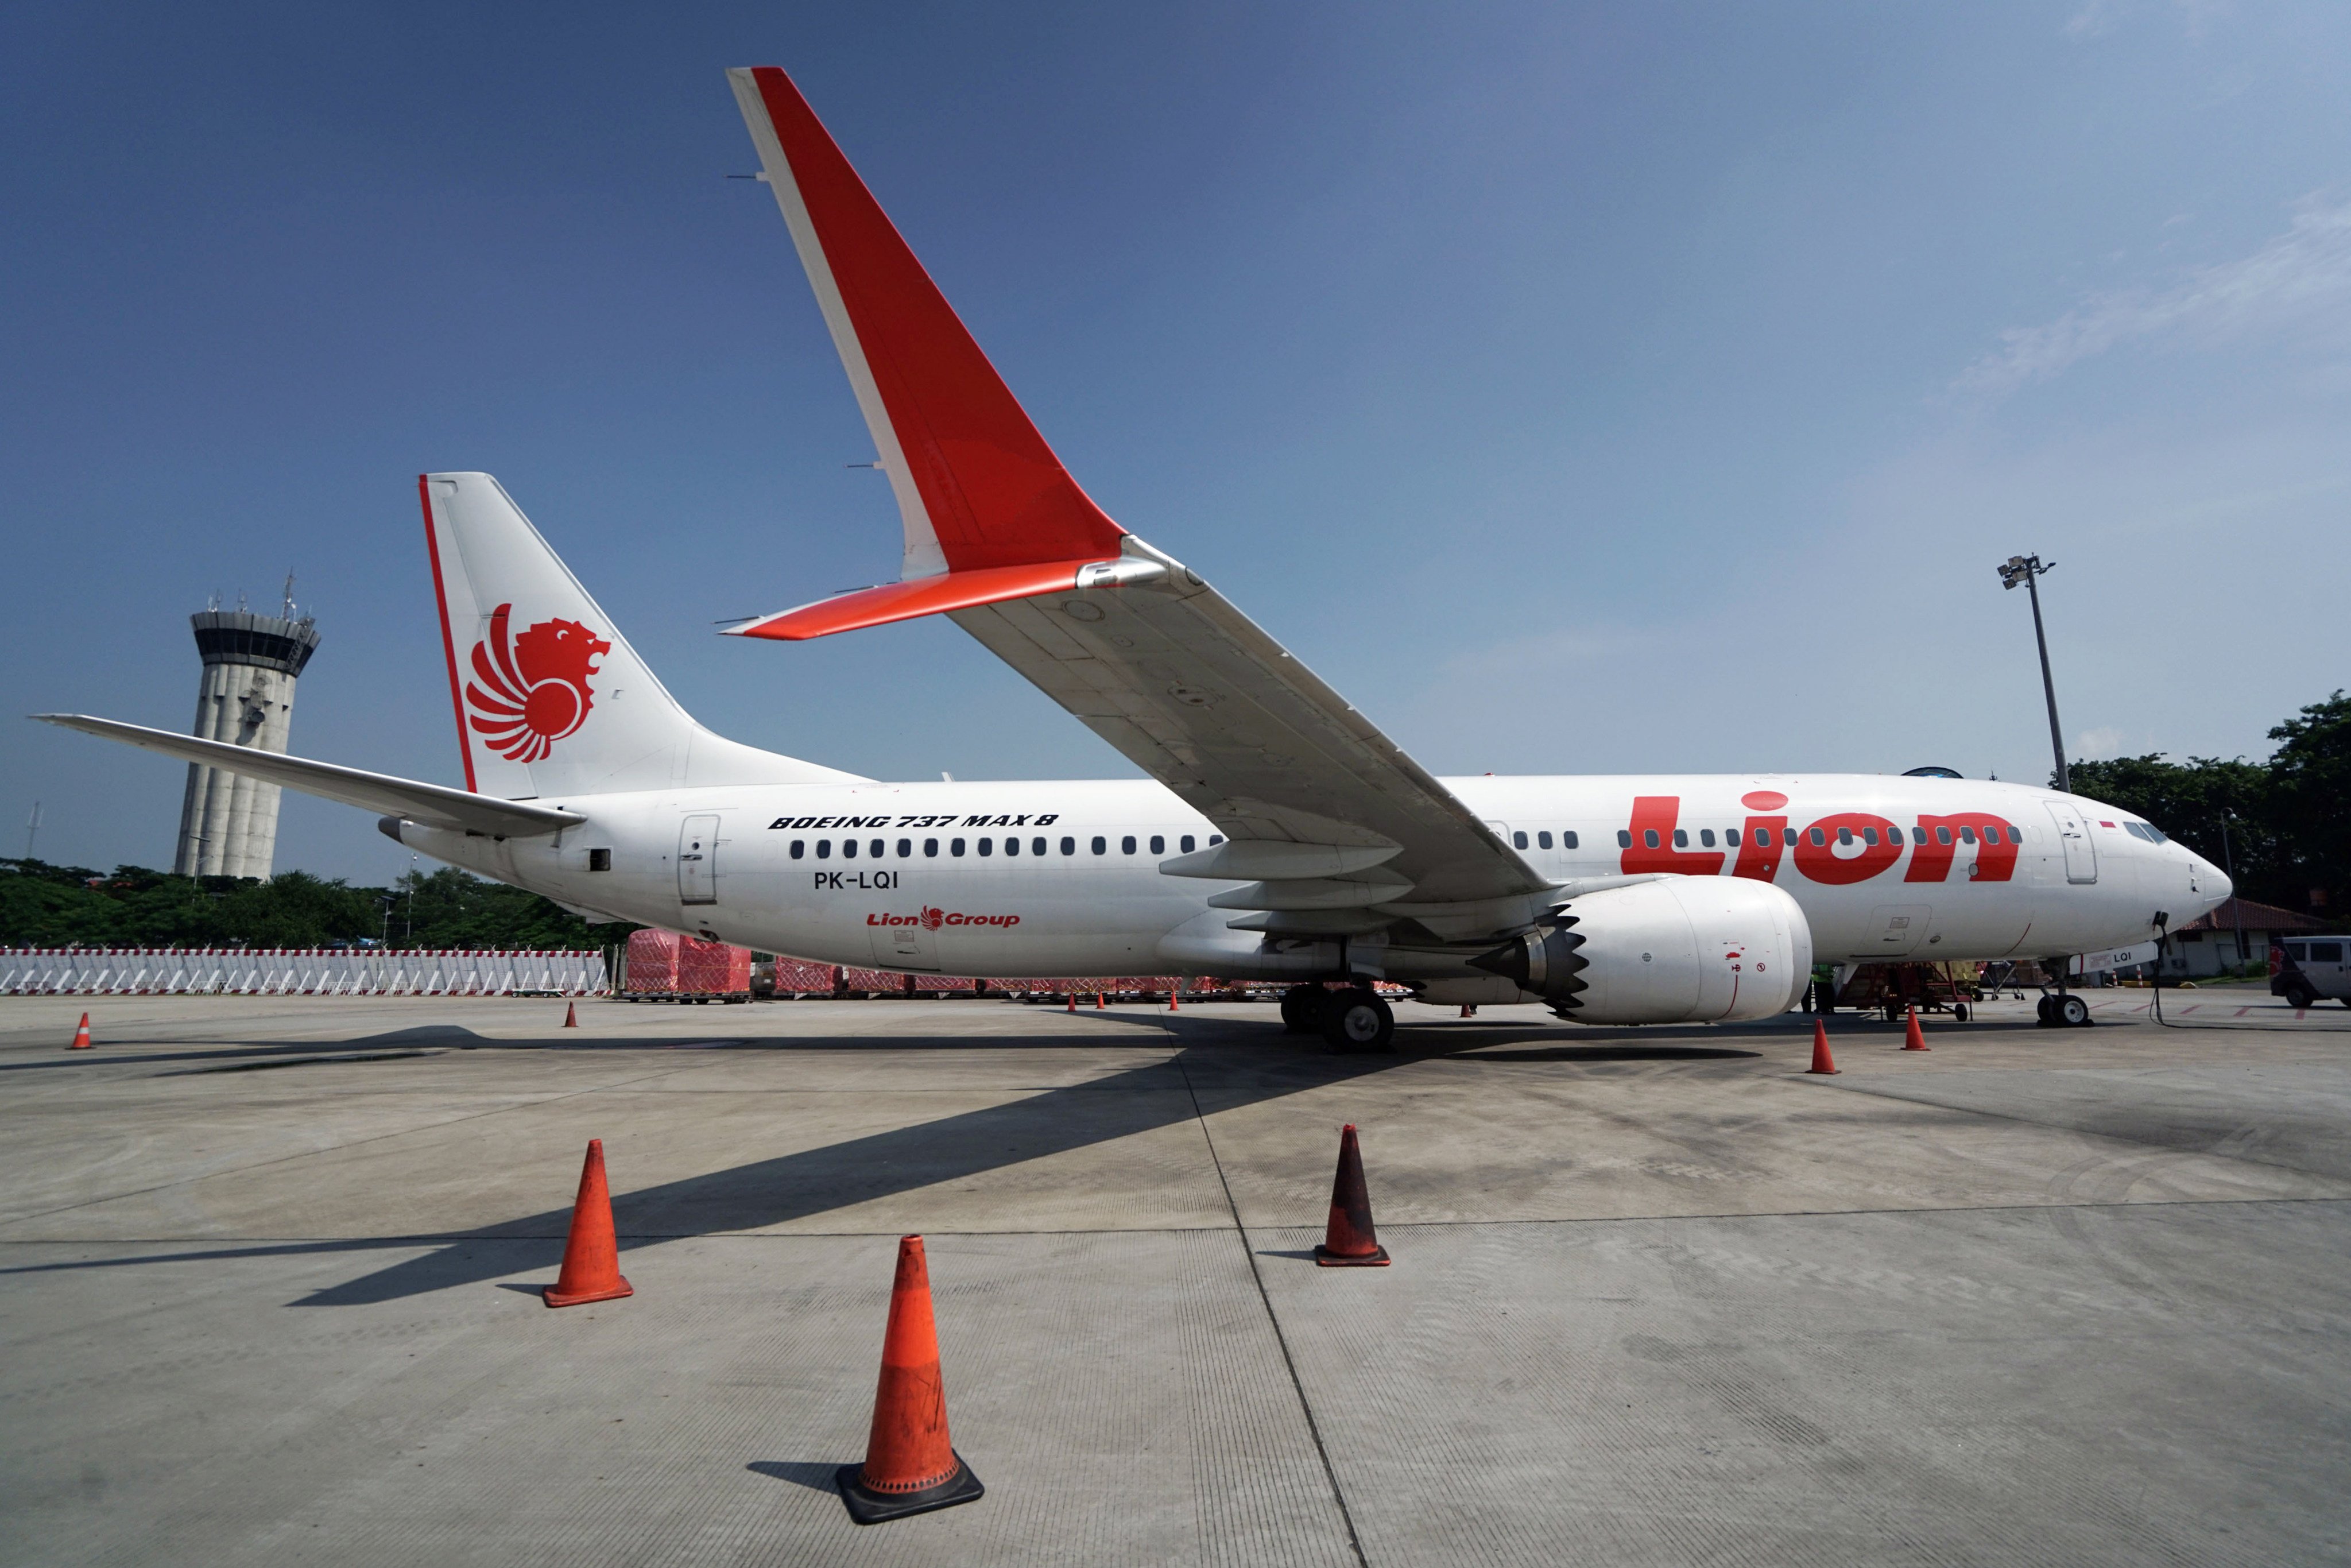 A Lion Air Boeing 737 Max 8 aircraft of the type that crashed into the Java Sea off Jakarta in 2018 killing all 189 people on board. Photo: Bloomberg